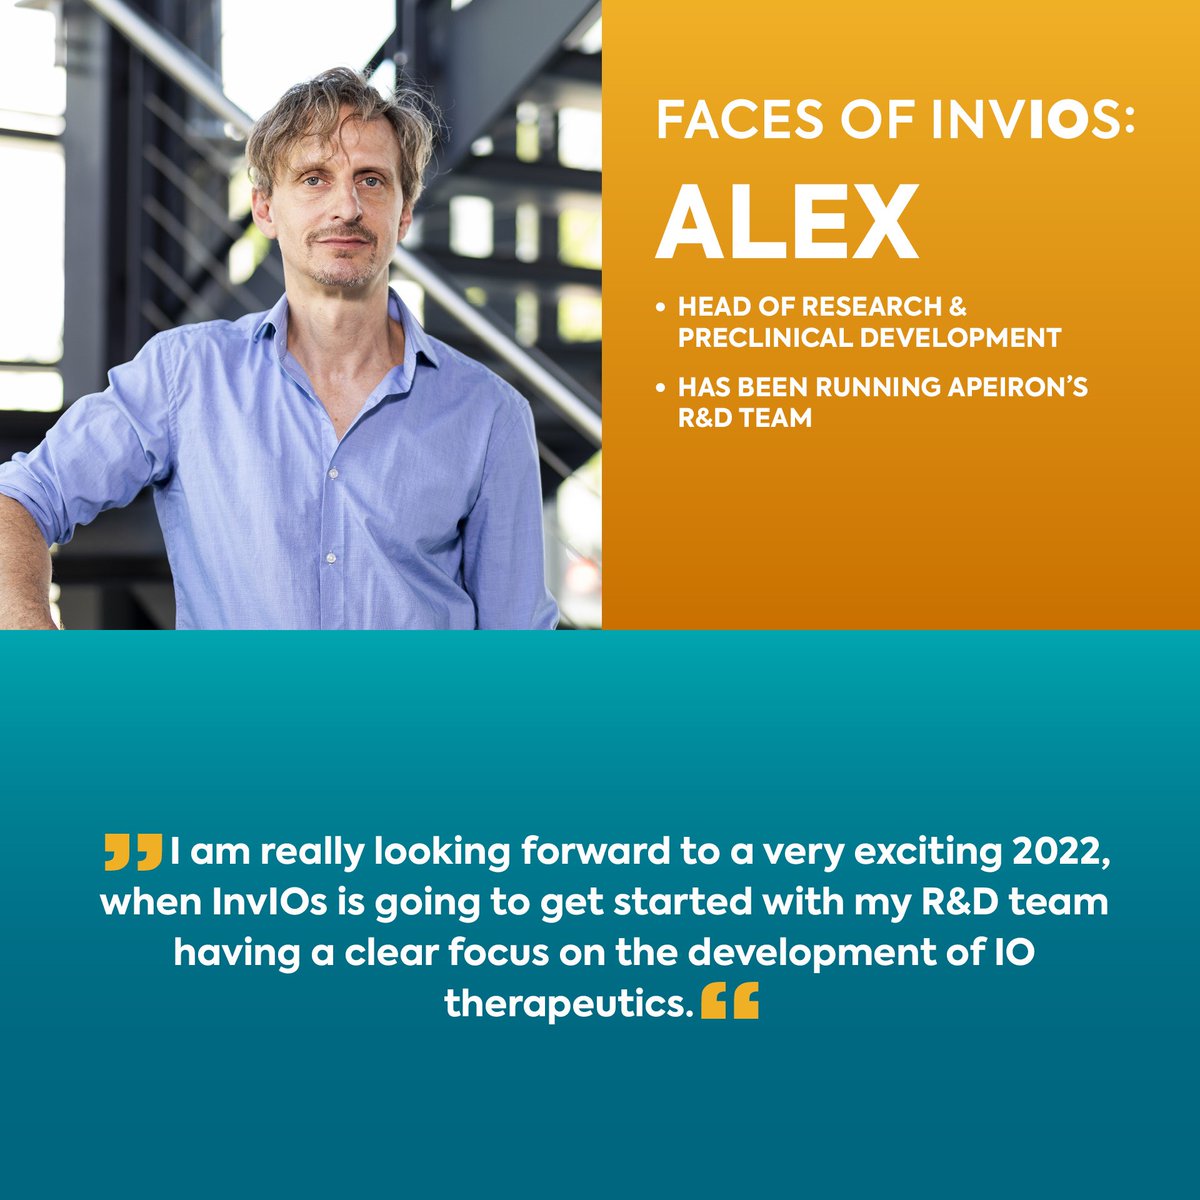 Only 5 days until invIOs goes live. Our todays face of invIOs is Alexander, Head of Research & Preclinical Development. Together with his team, he is responsible for the development of our immuno oncology therapeutics. #cancerresearch #immunooncology #team #biotech